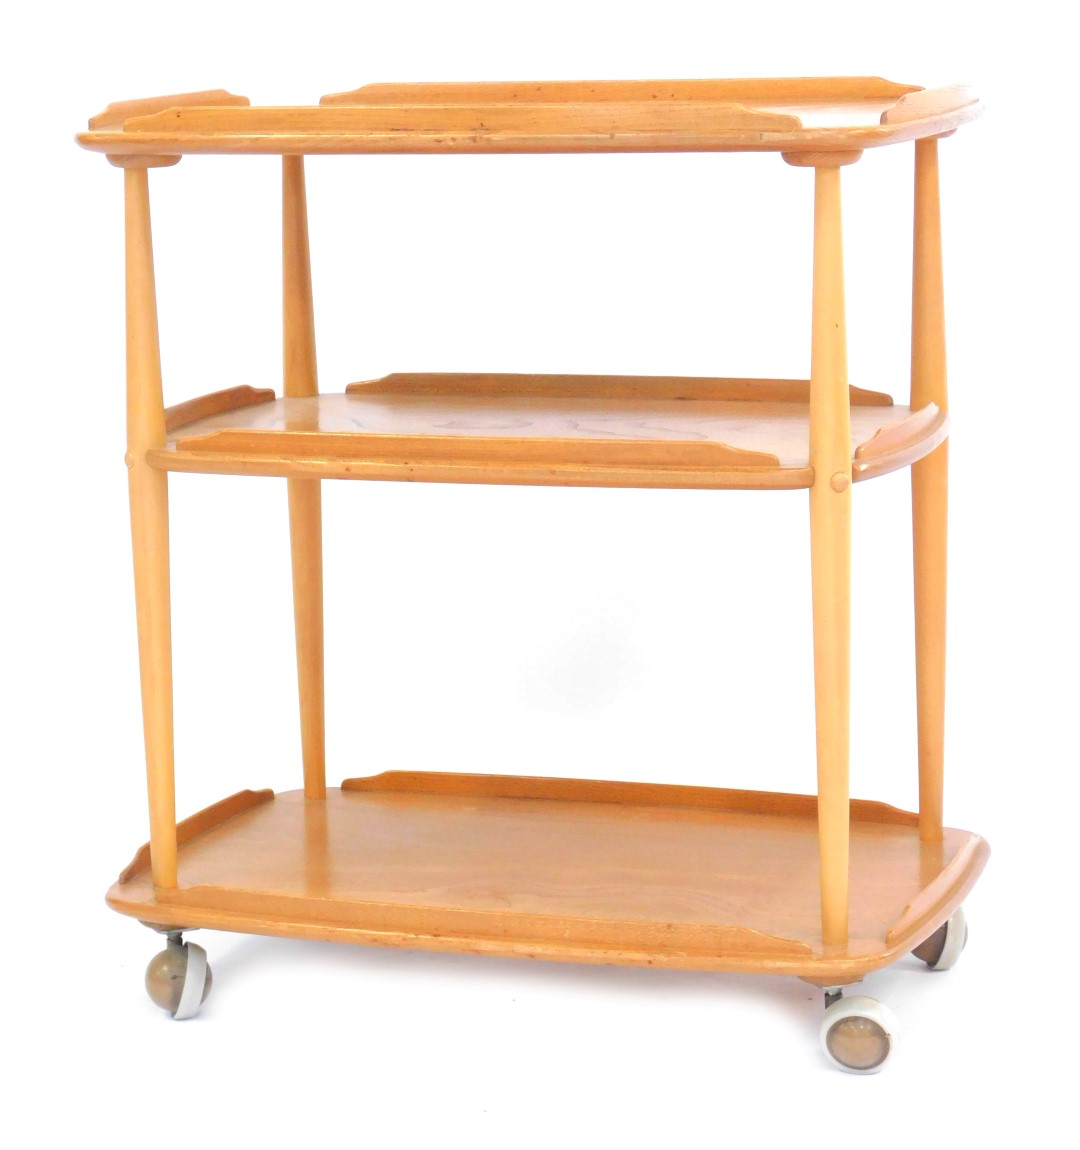 An Ercol light elm three tier trolley, each tier with a raised edge, on castors, model number 458, 7